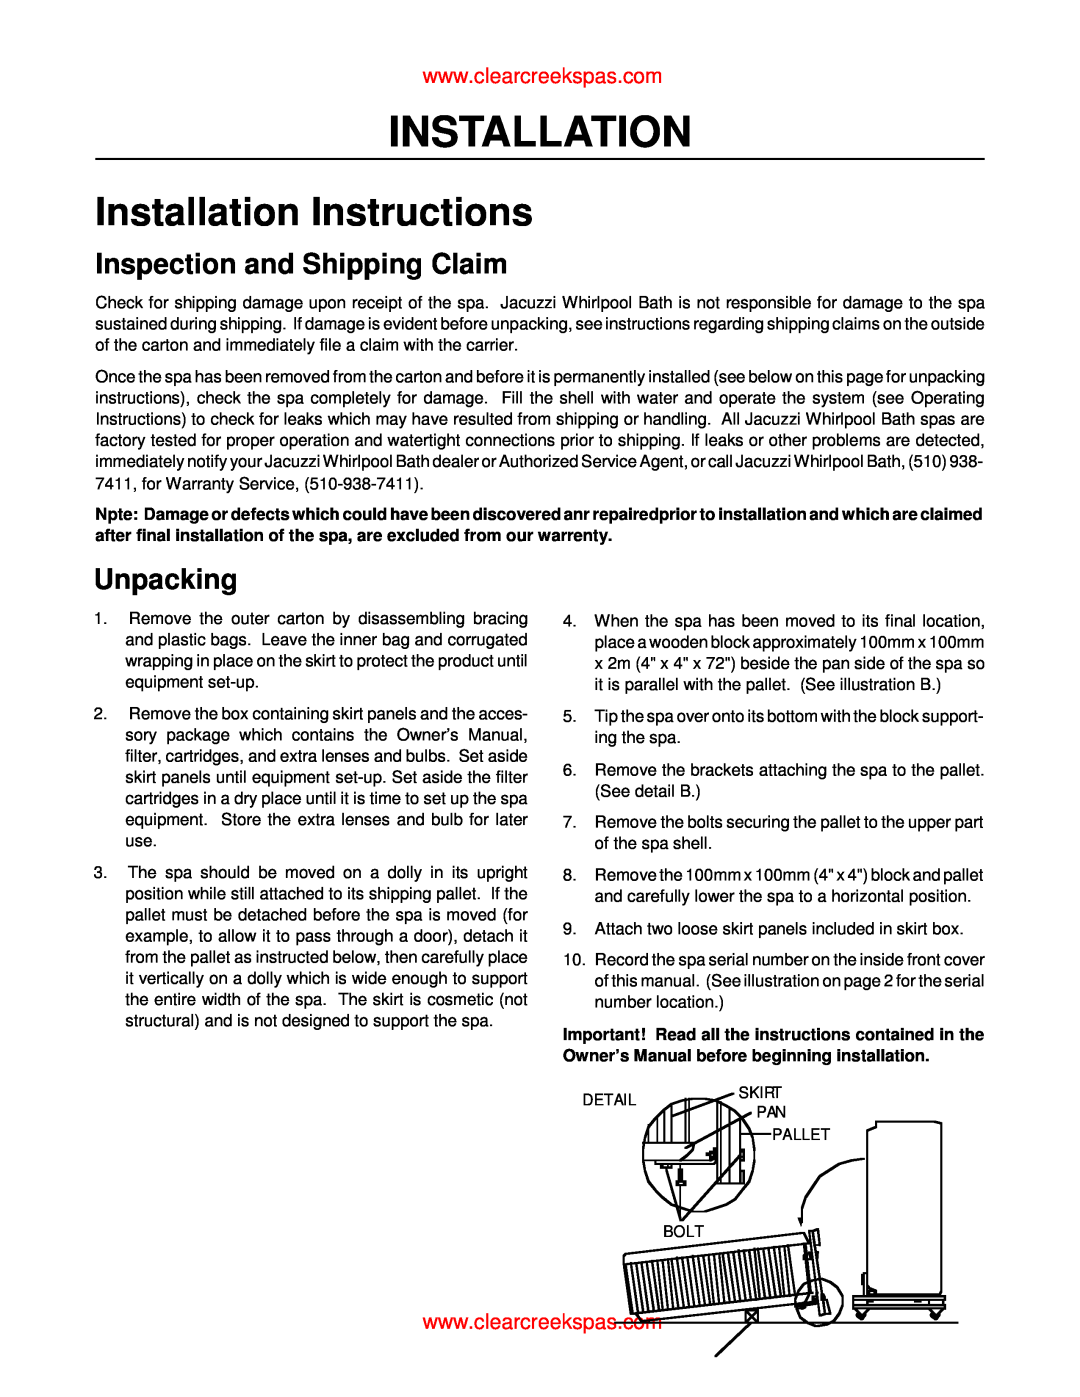 Whirlpool oortable spa owner manual Installation Instructions, Inspection and Shipping Claim, Unpacking 